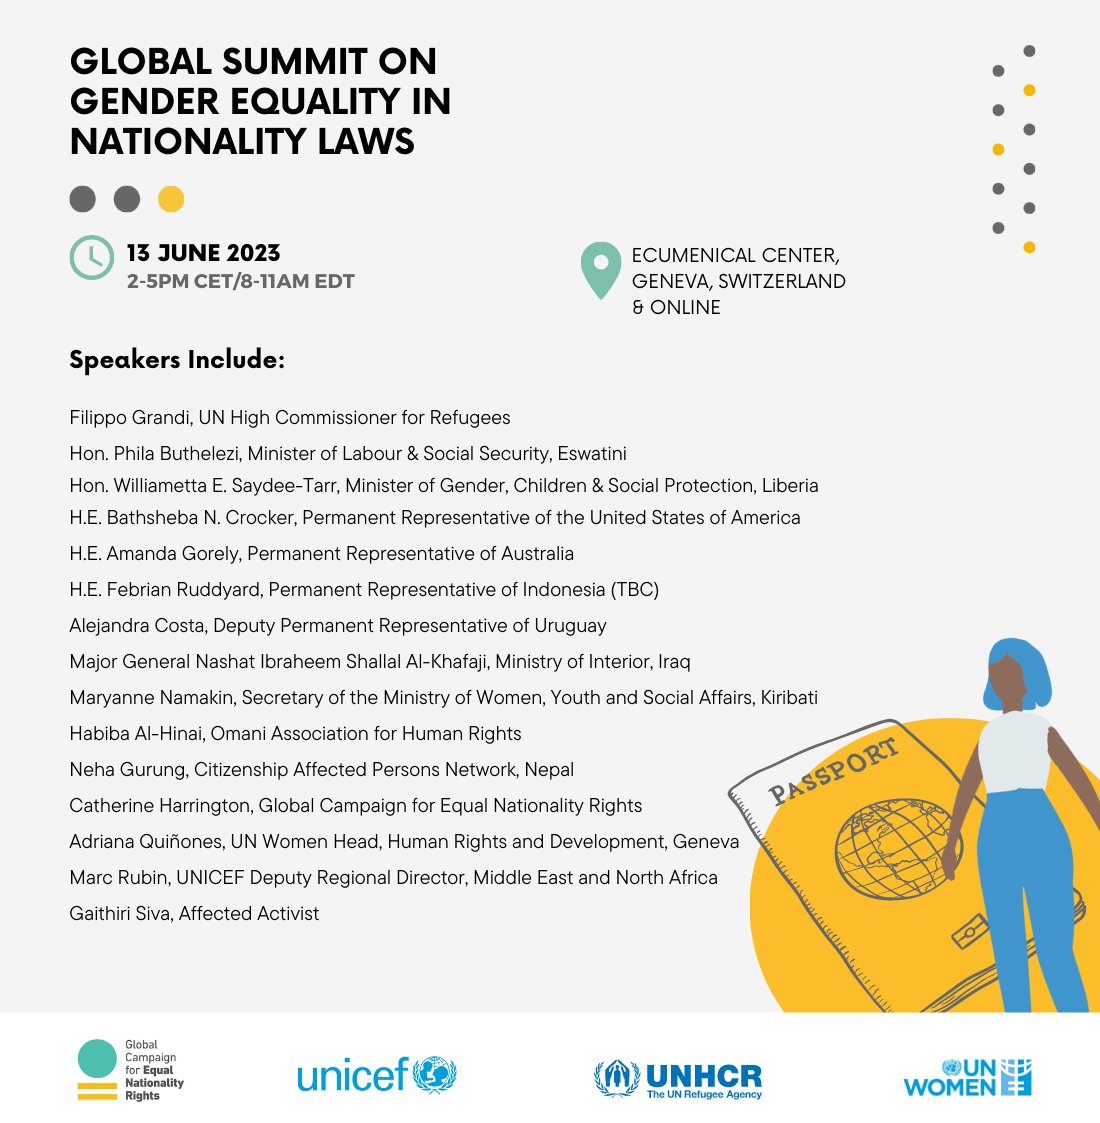 #HappeningTomorrow❗️

Our Deputy Regional Director @MrMarcRubin will be speaking at the Global Summit on Gender Equality in Nationality Laws.

Join us to learn more about how these laws directly impact children's rights. 

Register here : bit.ly/43W49Jx